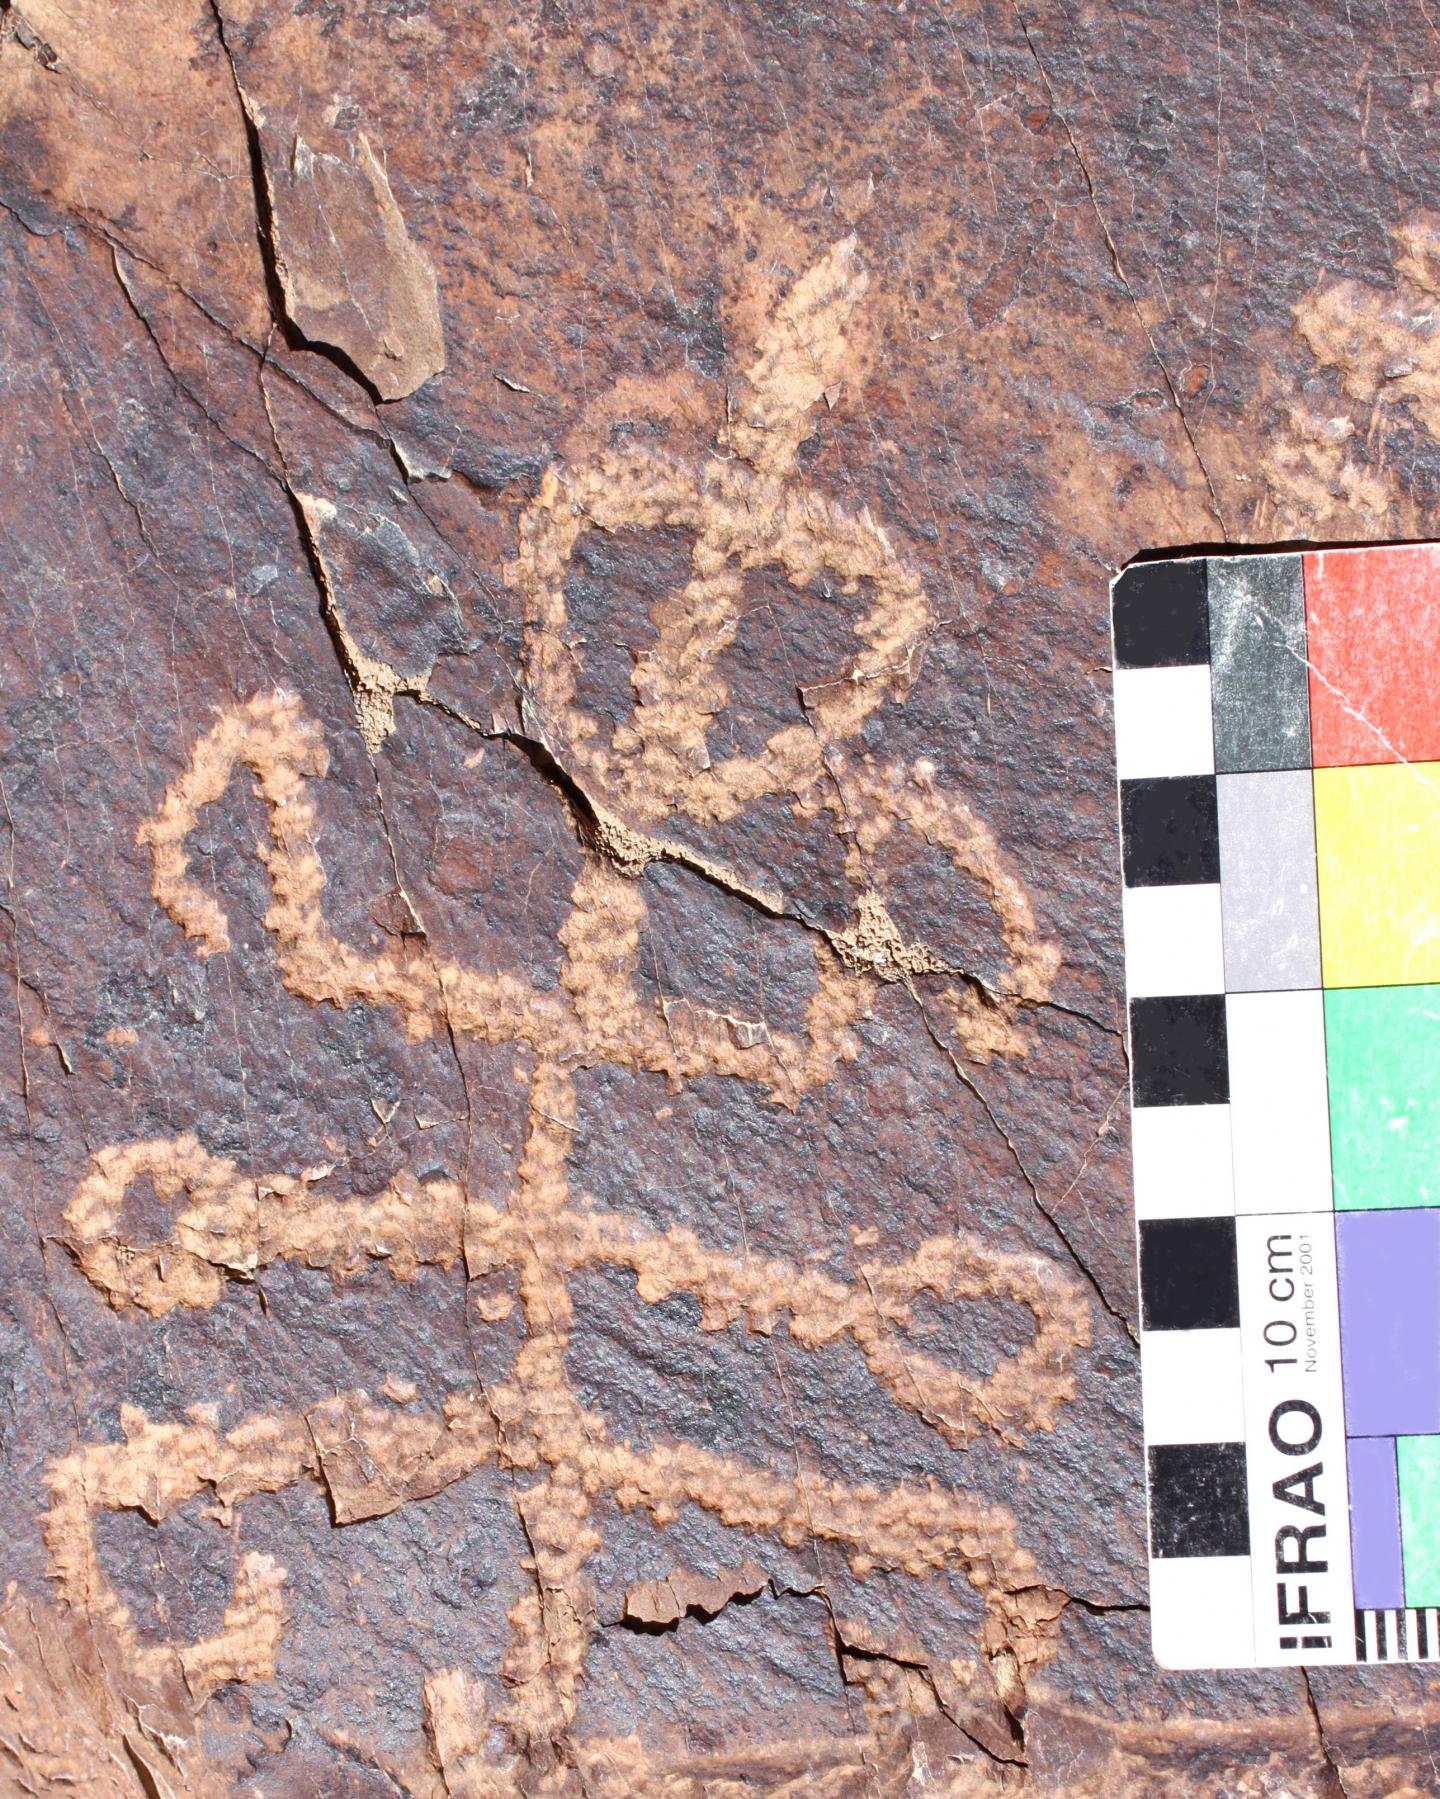 Ancient petroglyph of creature that is half man half mantis discovered in Iran